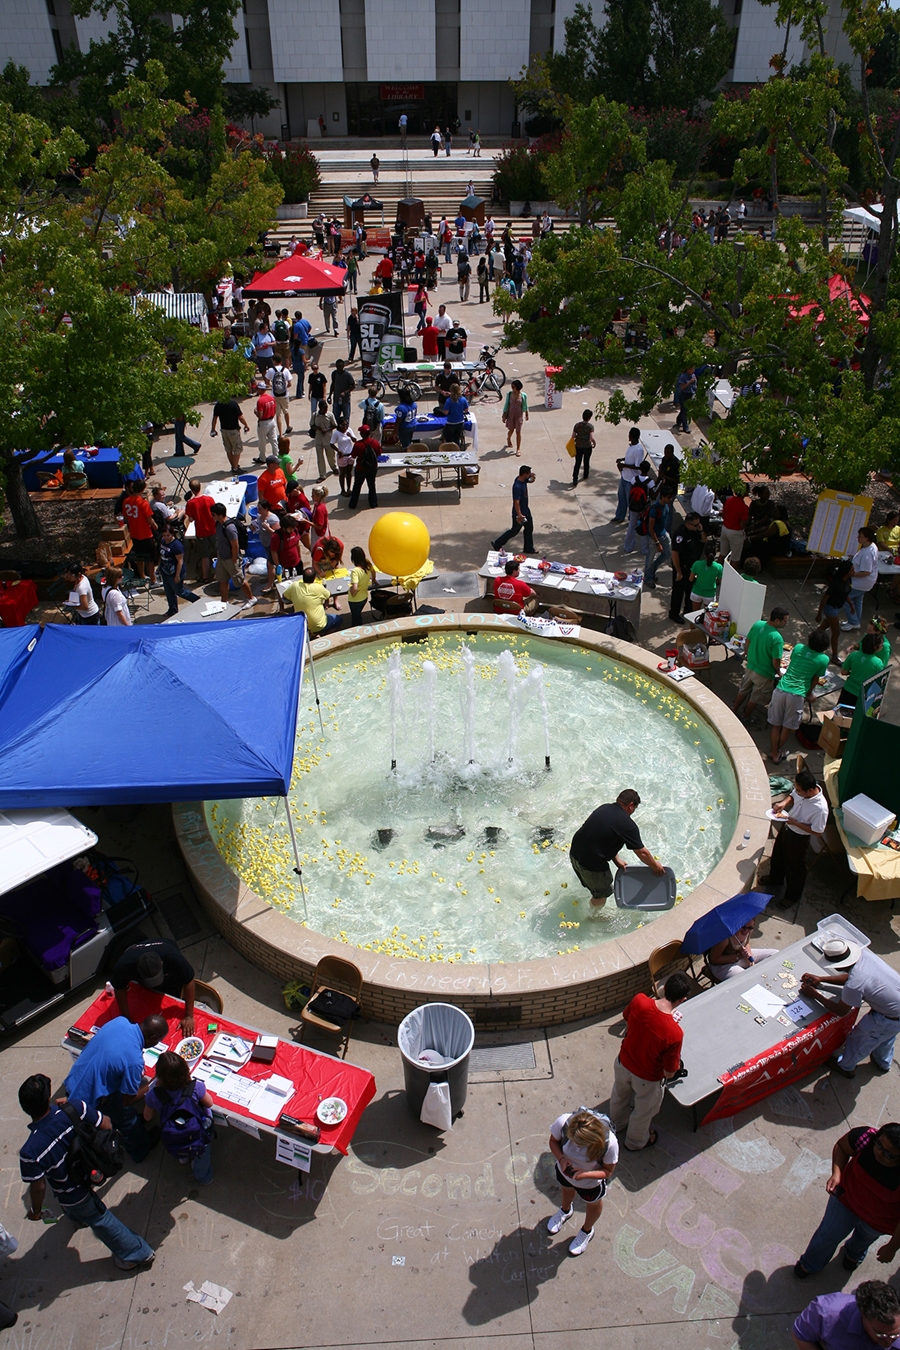 Razorbash is happening today on the Arkansas Union Mall from 11 a.m. to 2 p.m.